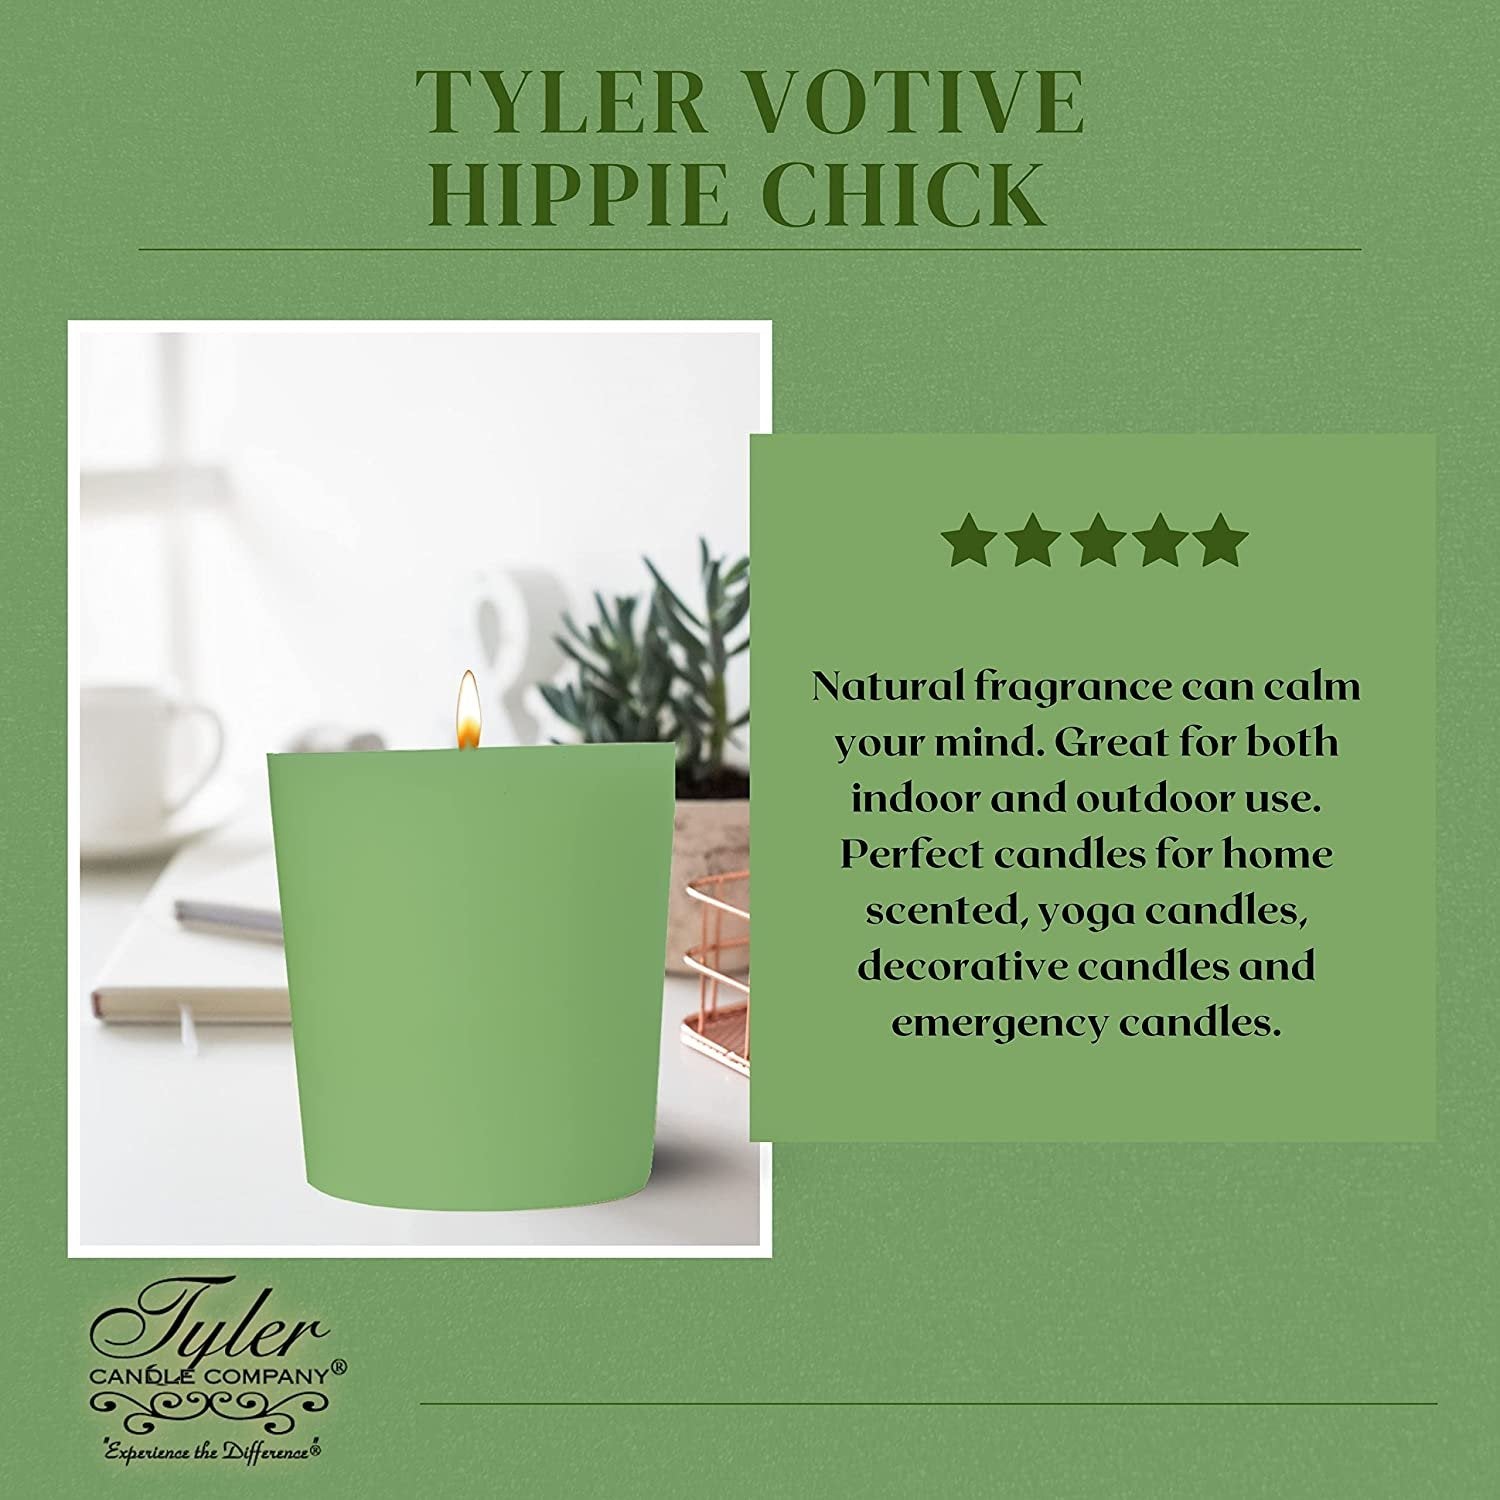 Tyler Candle Company Hippie Chick Votive Candles - Luxury Scented Candle with Essential Oils - 16 Pack of 2 oz Small Candles with 15 Hour Burn Time Each - with Bonus Key Chain